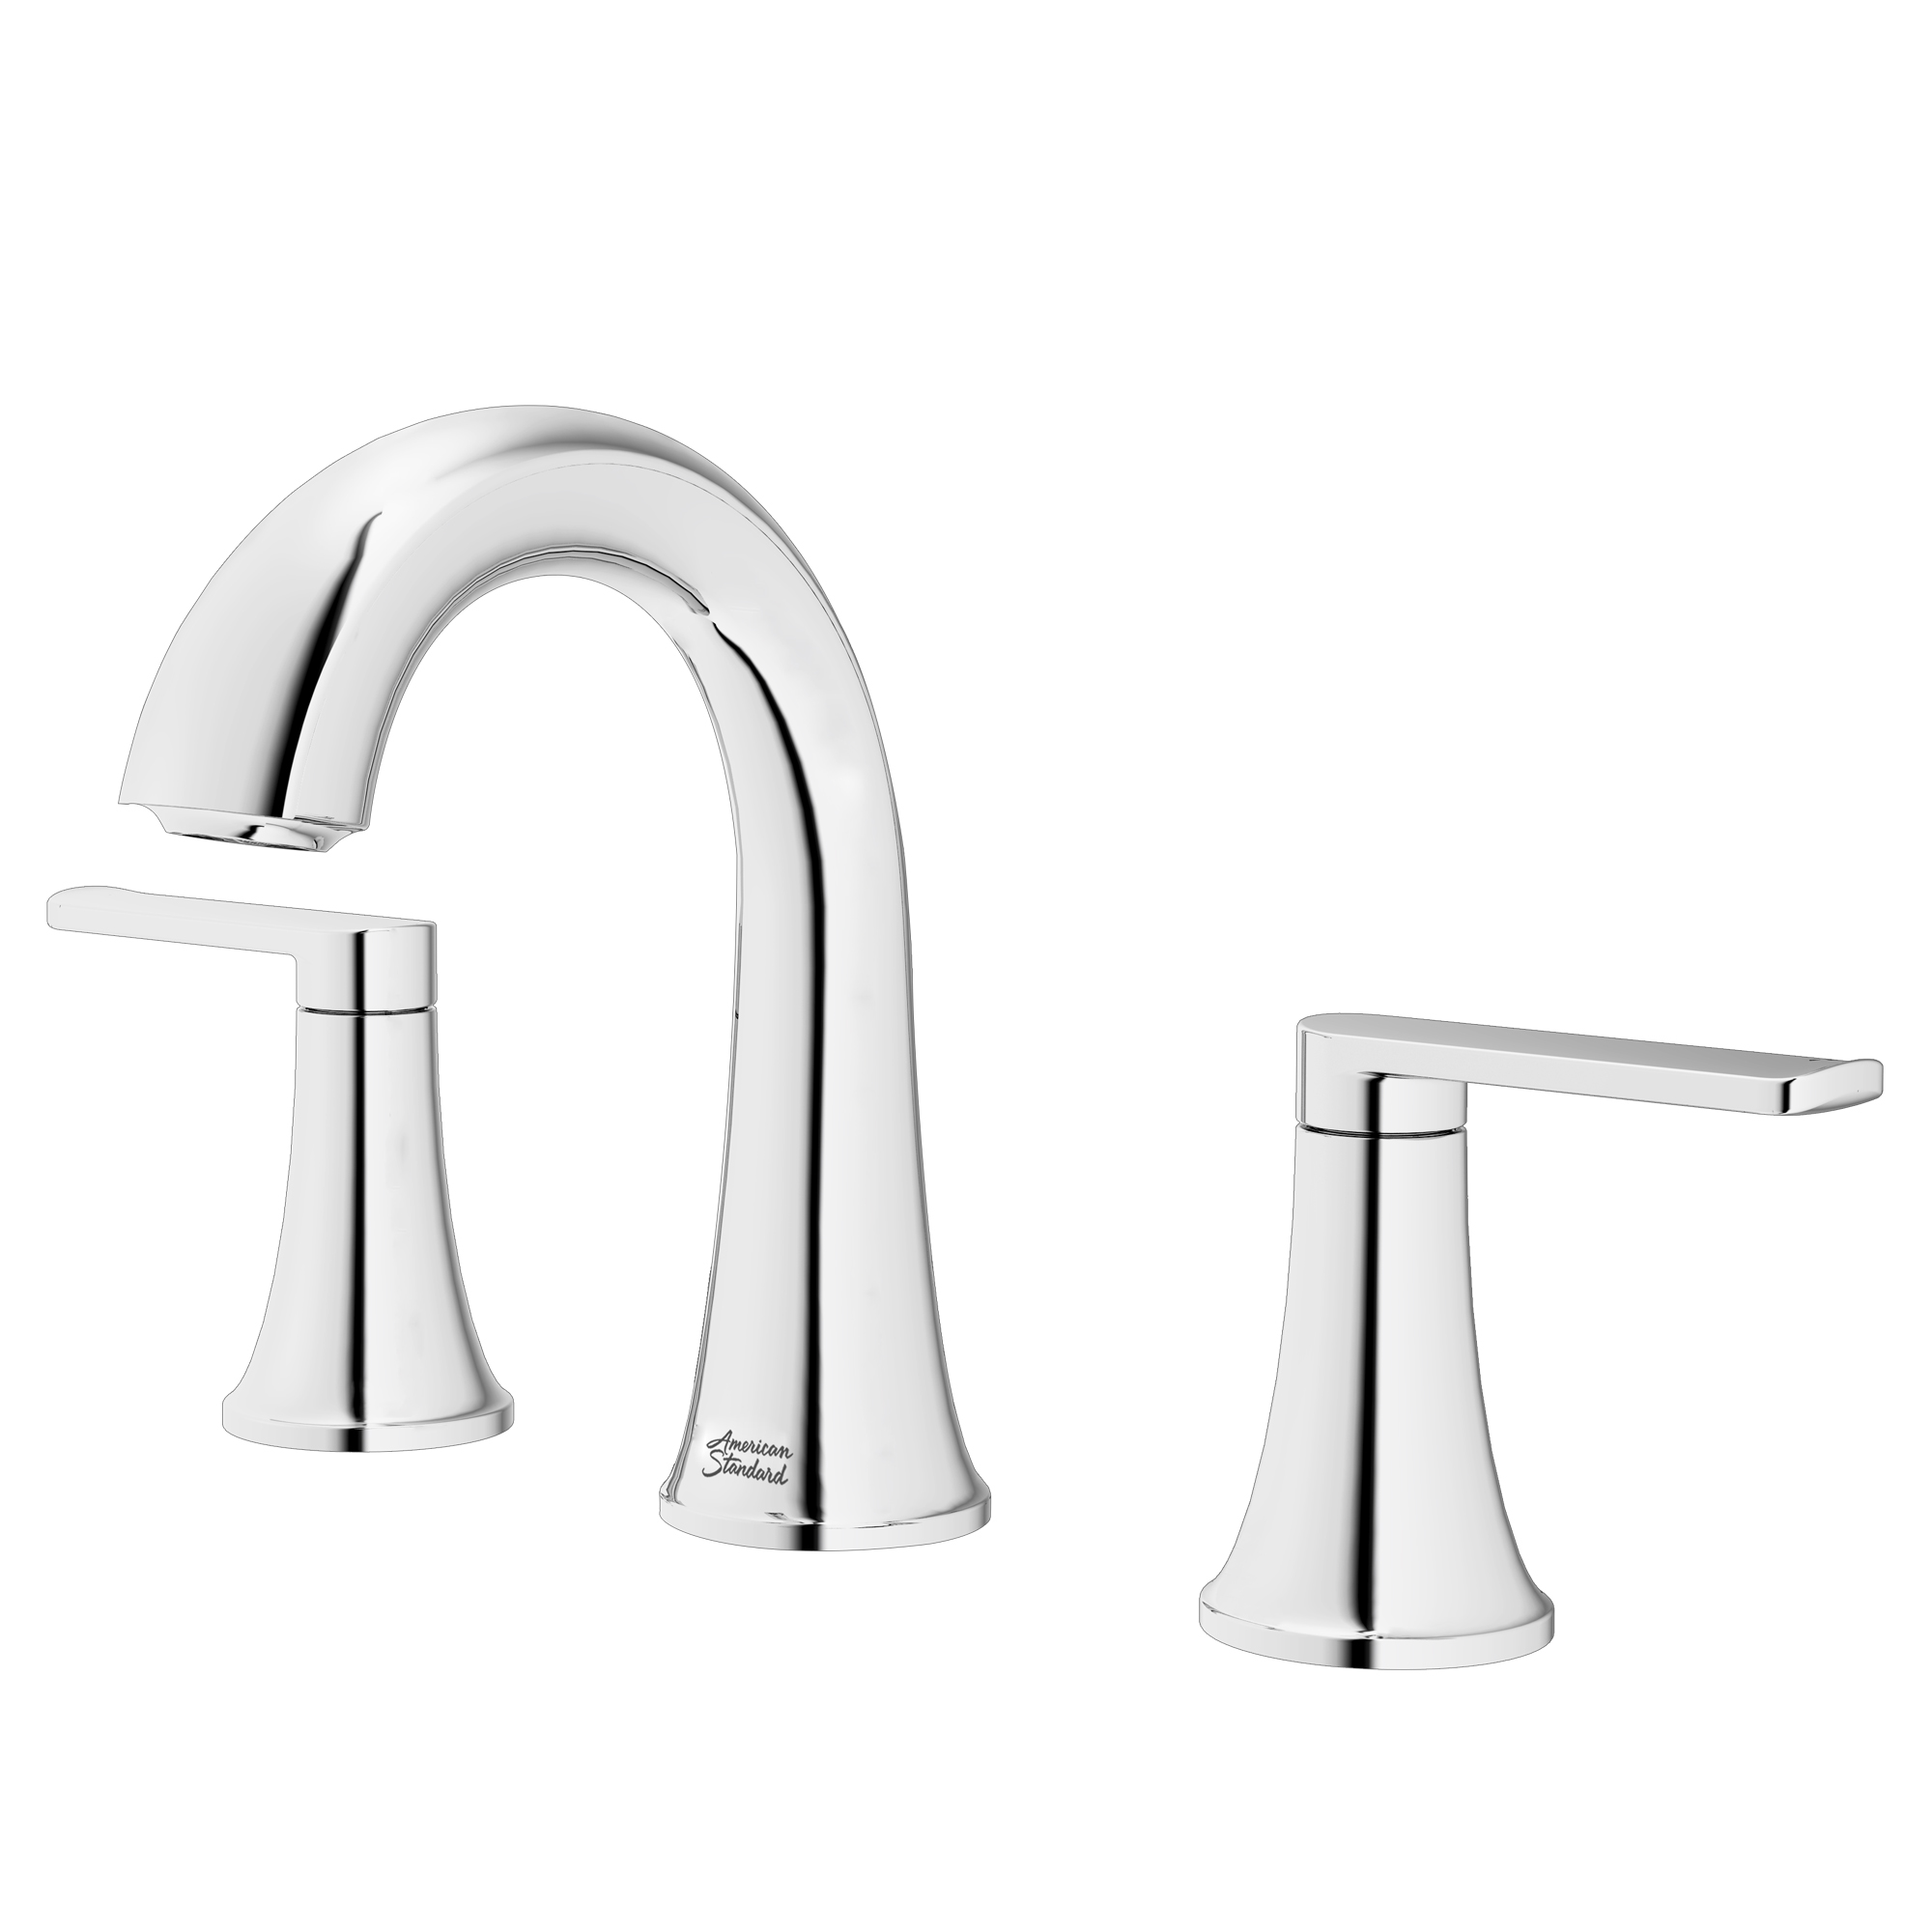 Corsham 8-Inch Widespread 2-Handle Bathroom Faucet 1.2 gpm/4.5 L/min with Lever Handle